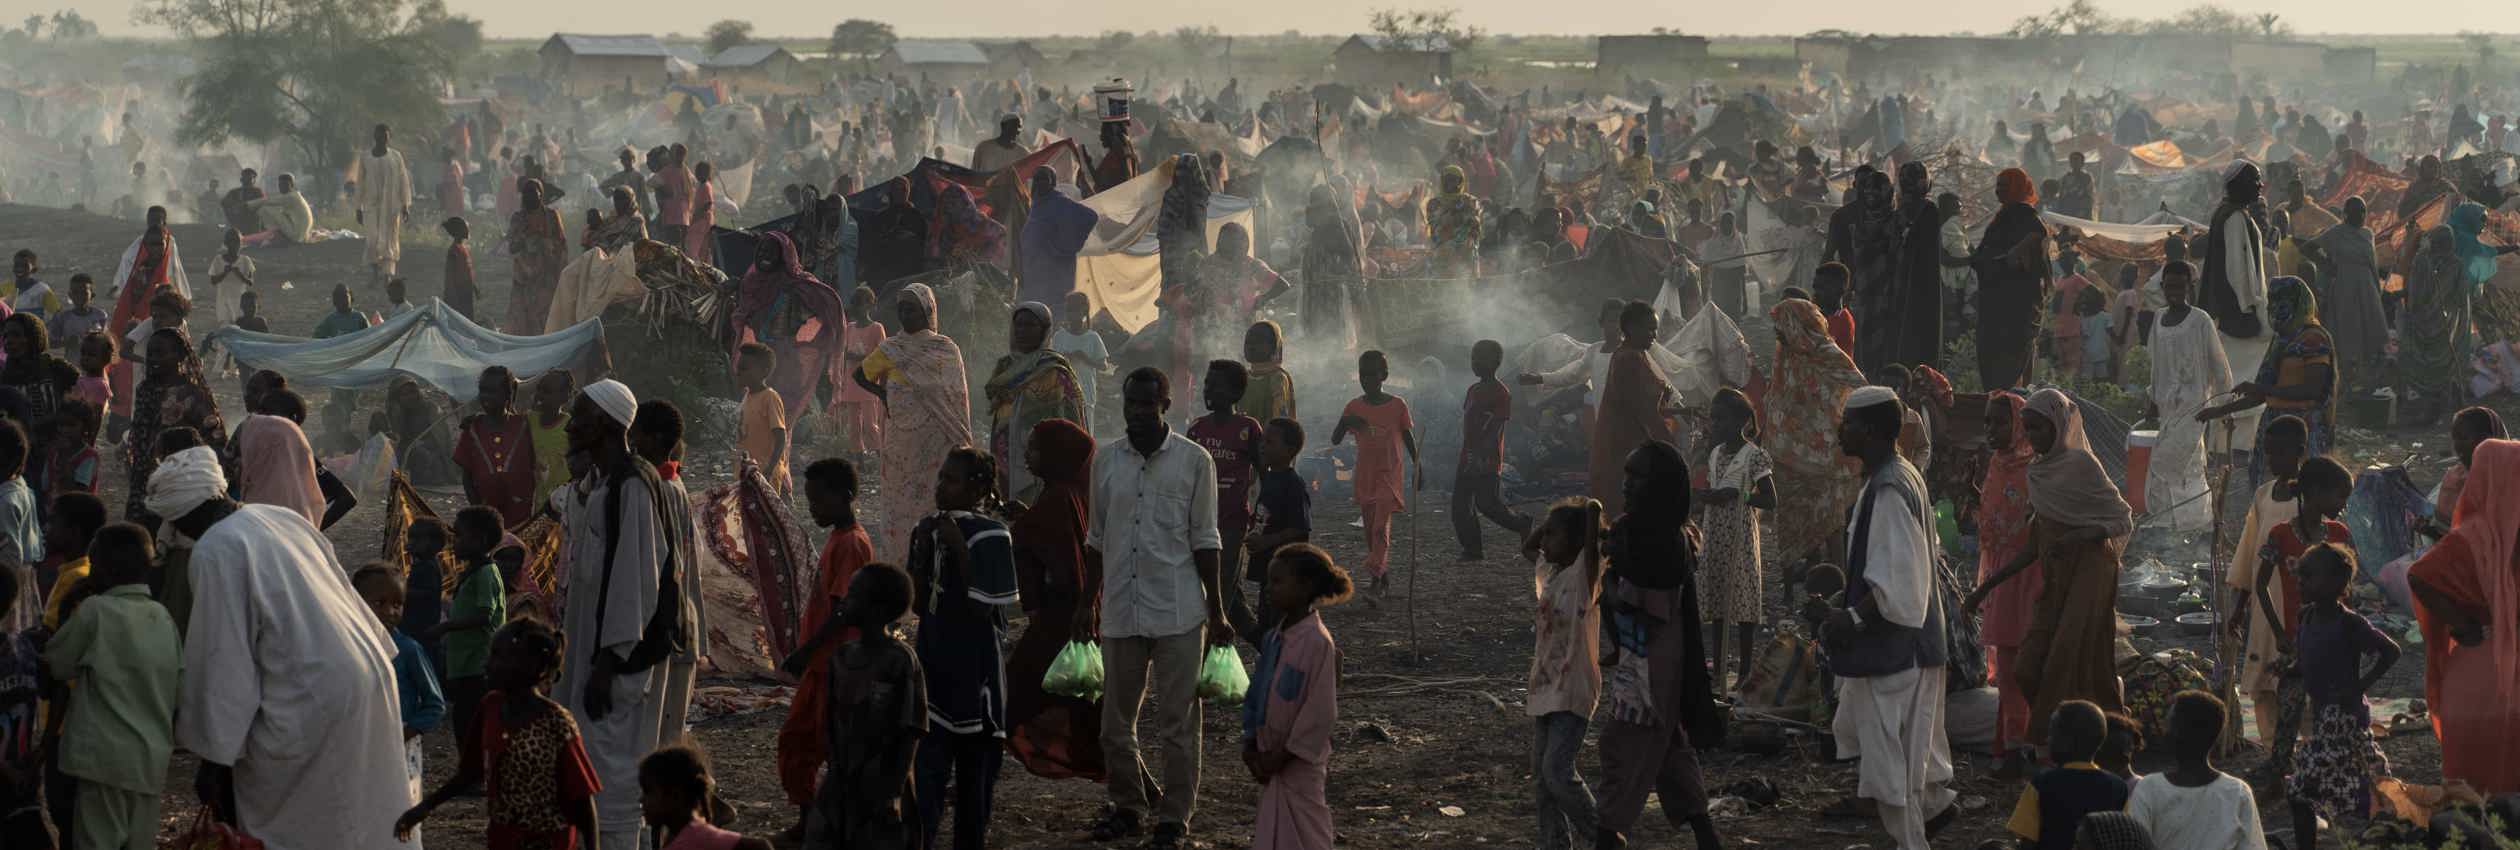 South Sudan. Sudanese Refugees And South Sudanese Returnees Arriving In South Sudan Through Joda Border Point. 